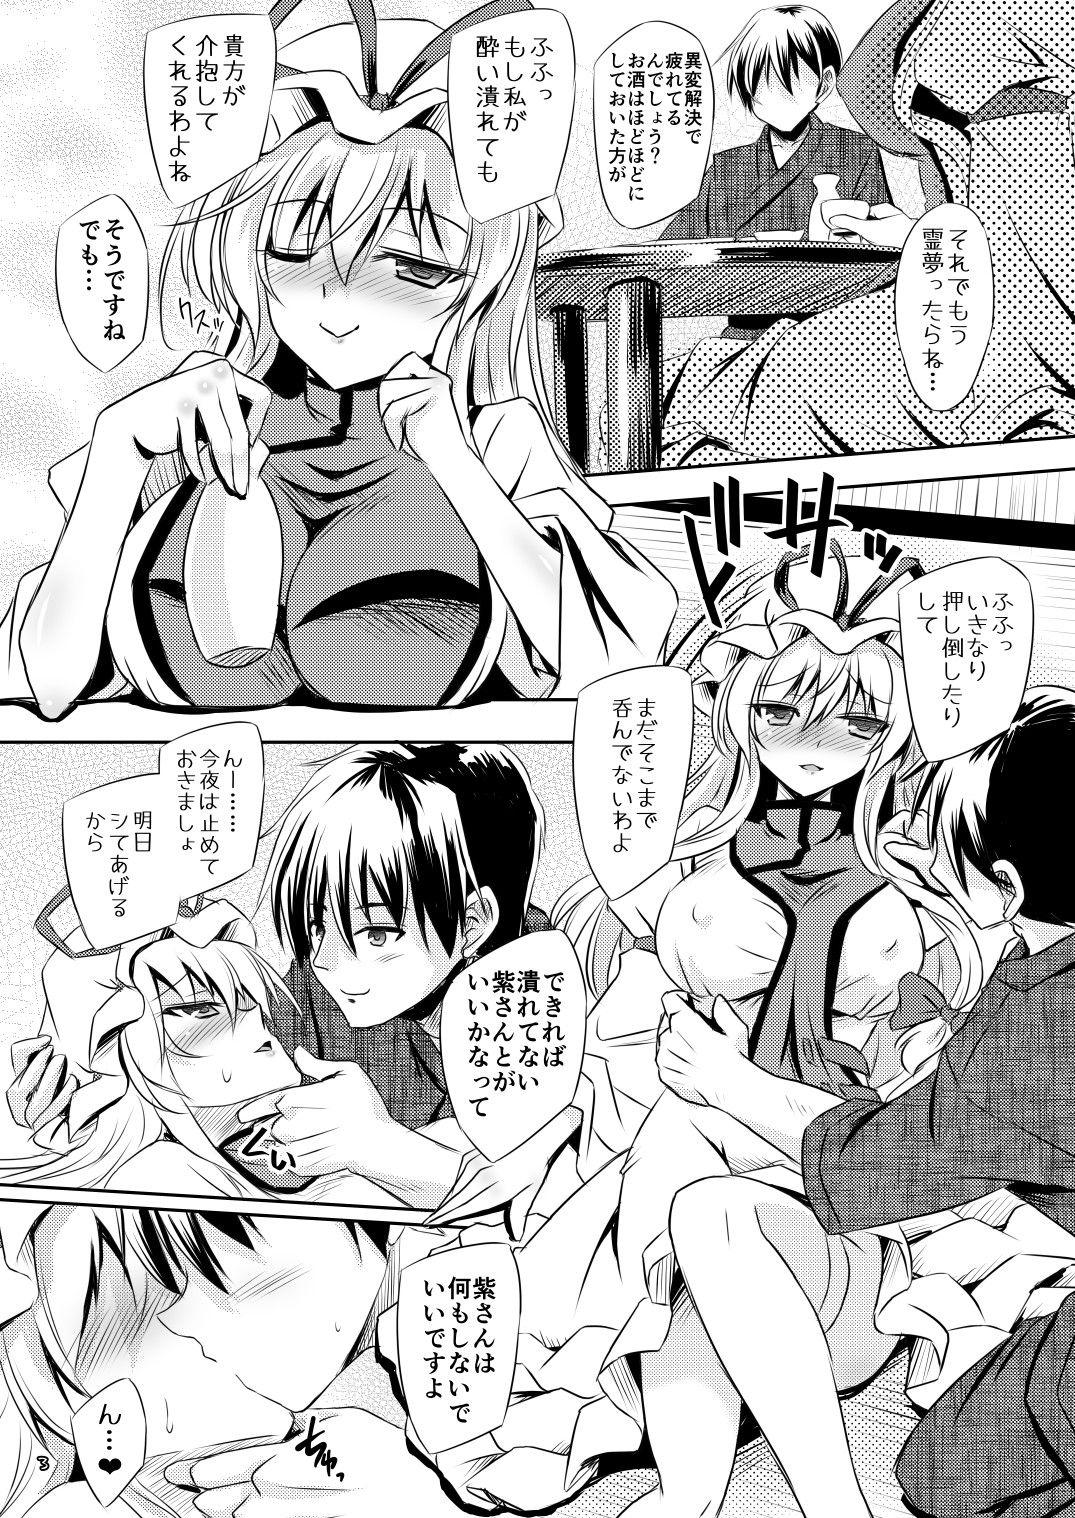 Livecams Kenja no Tame no Prelude - Touhou project Tranny - Page 3